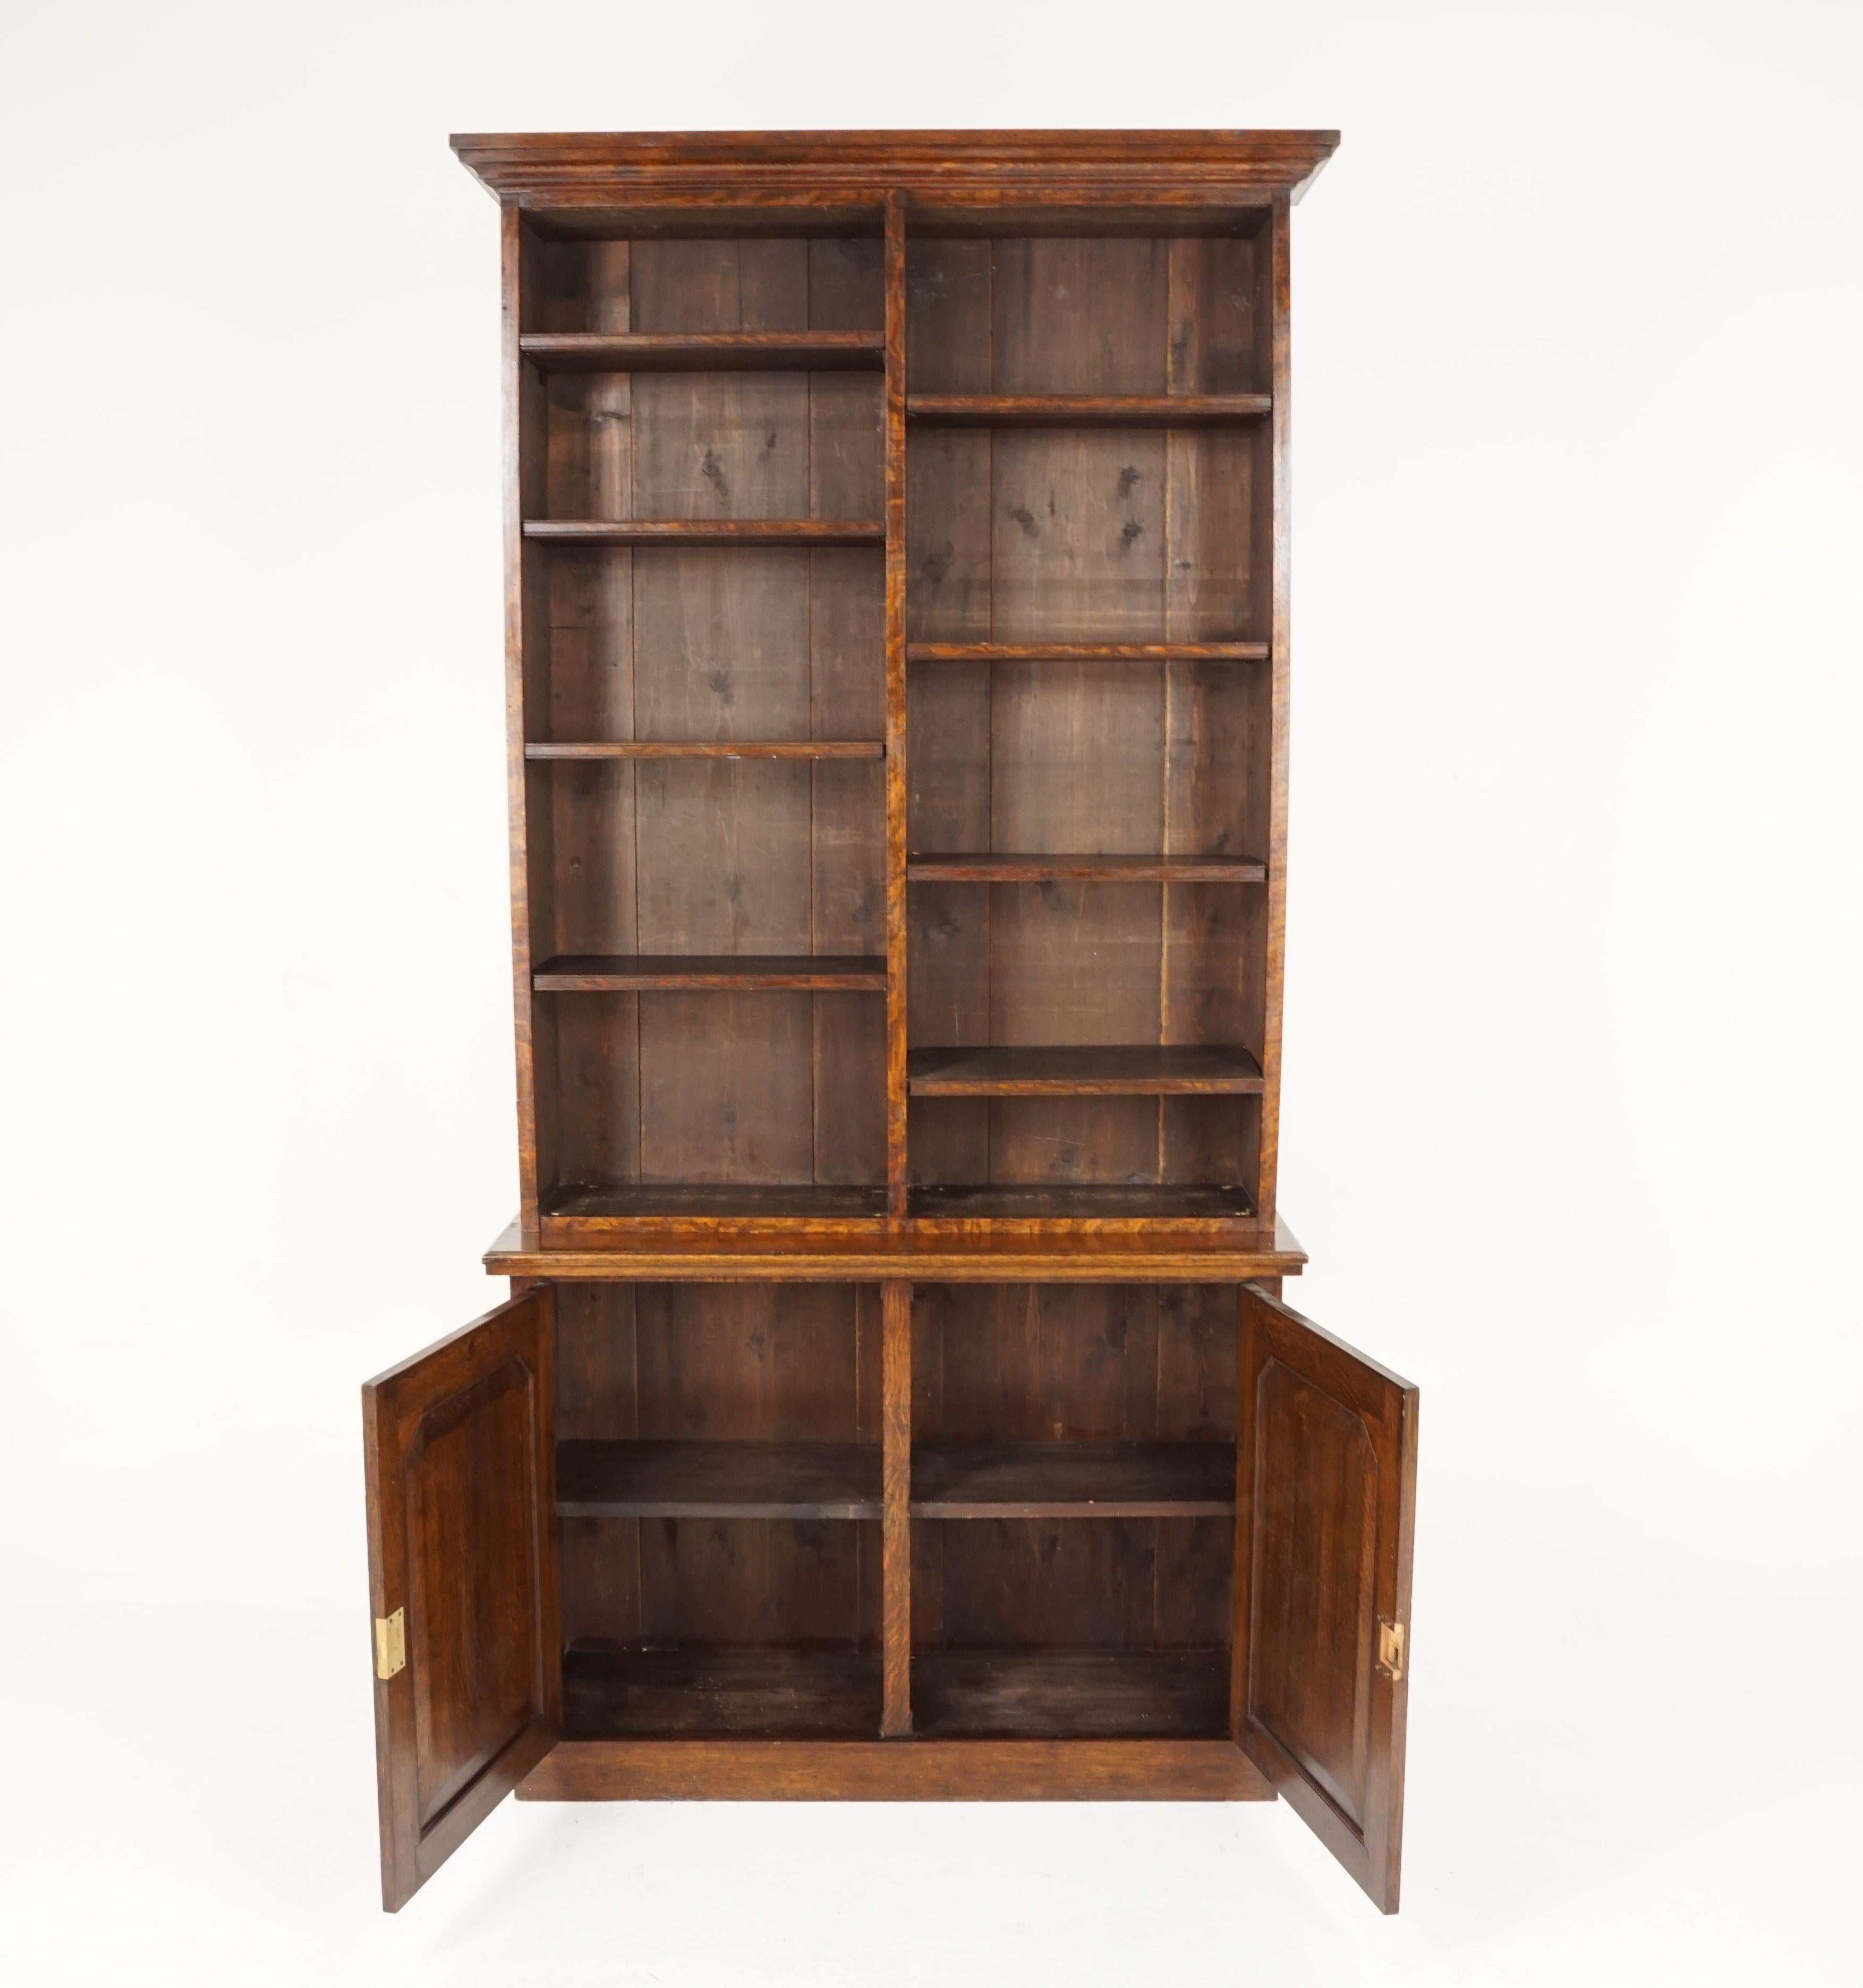 Antique Victorian tiger oak open bookcase display cabinet, Scotland 1890, B2340

Scotland, 1890
Solid oak
Original finish
Splayed moulded top cornice
Two part open bookcase with eight adjustable shelves
The base with a pair of paneled